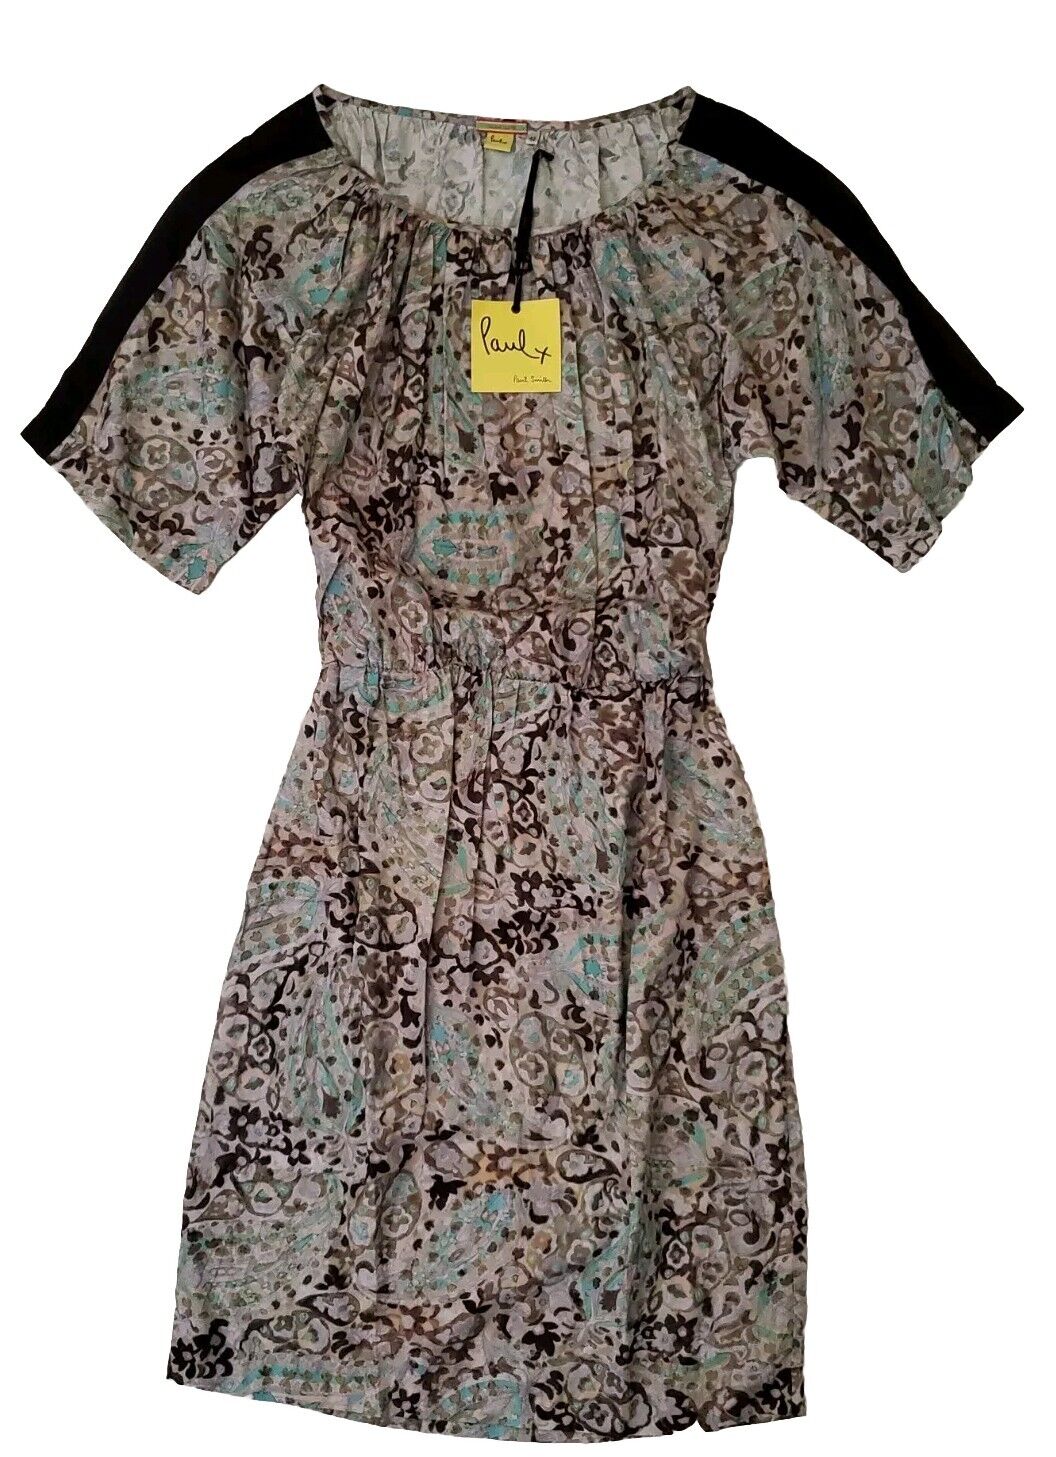 PAUL SMITH Summer Dress Womens S Floral Effect Italian Cloth Blue and Grey